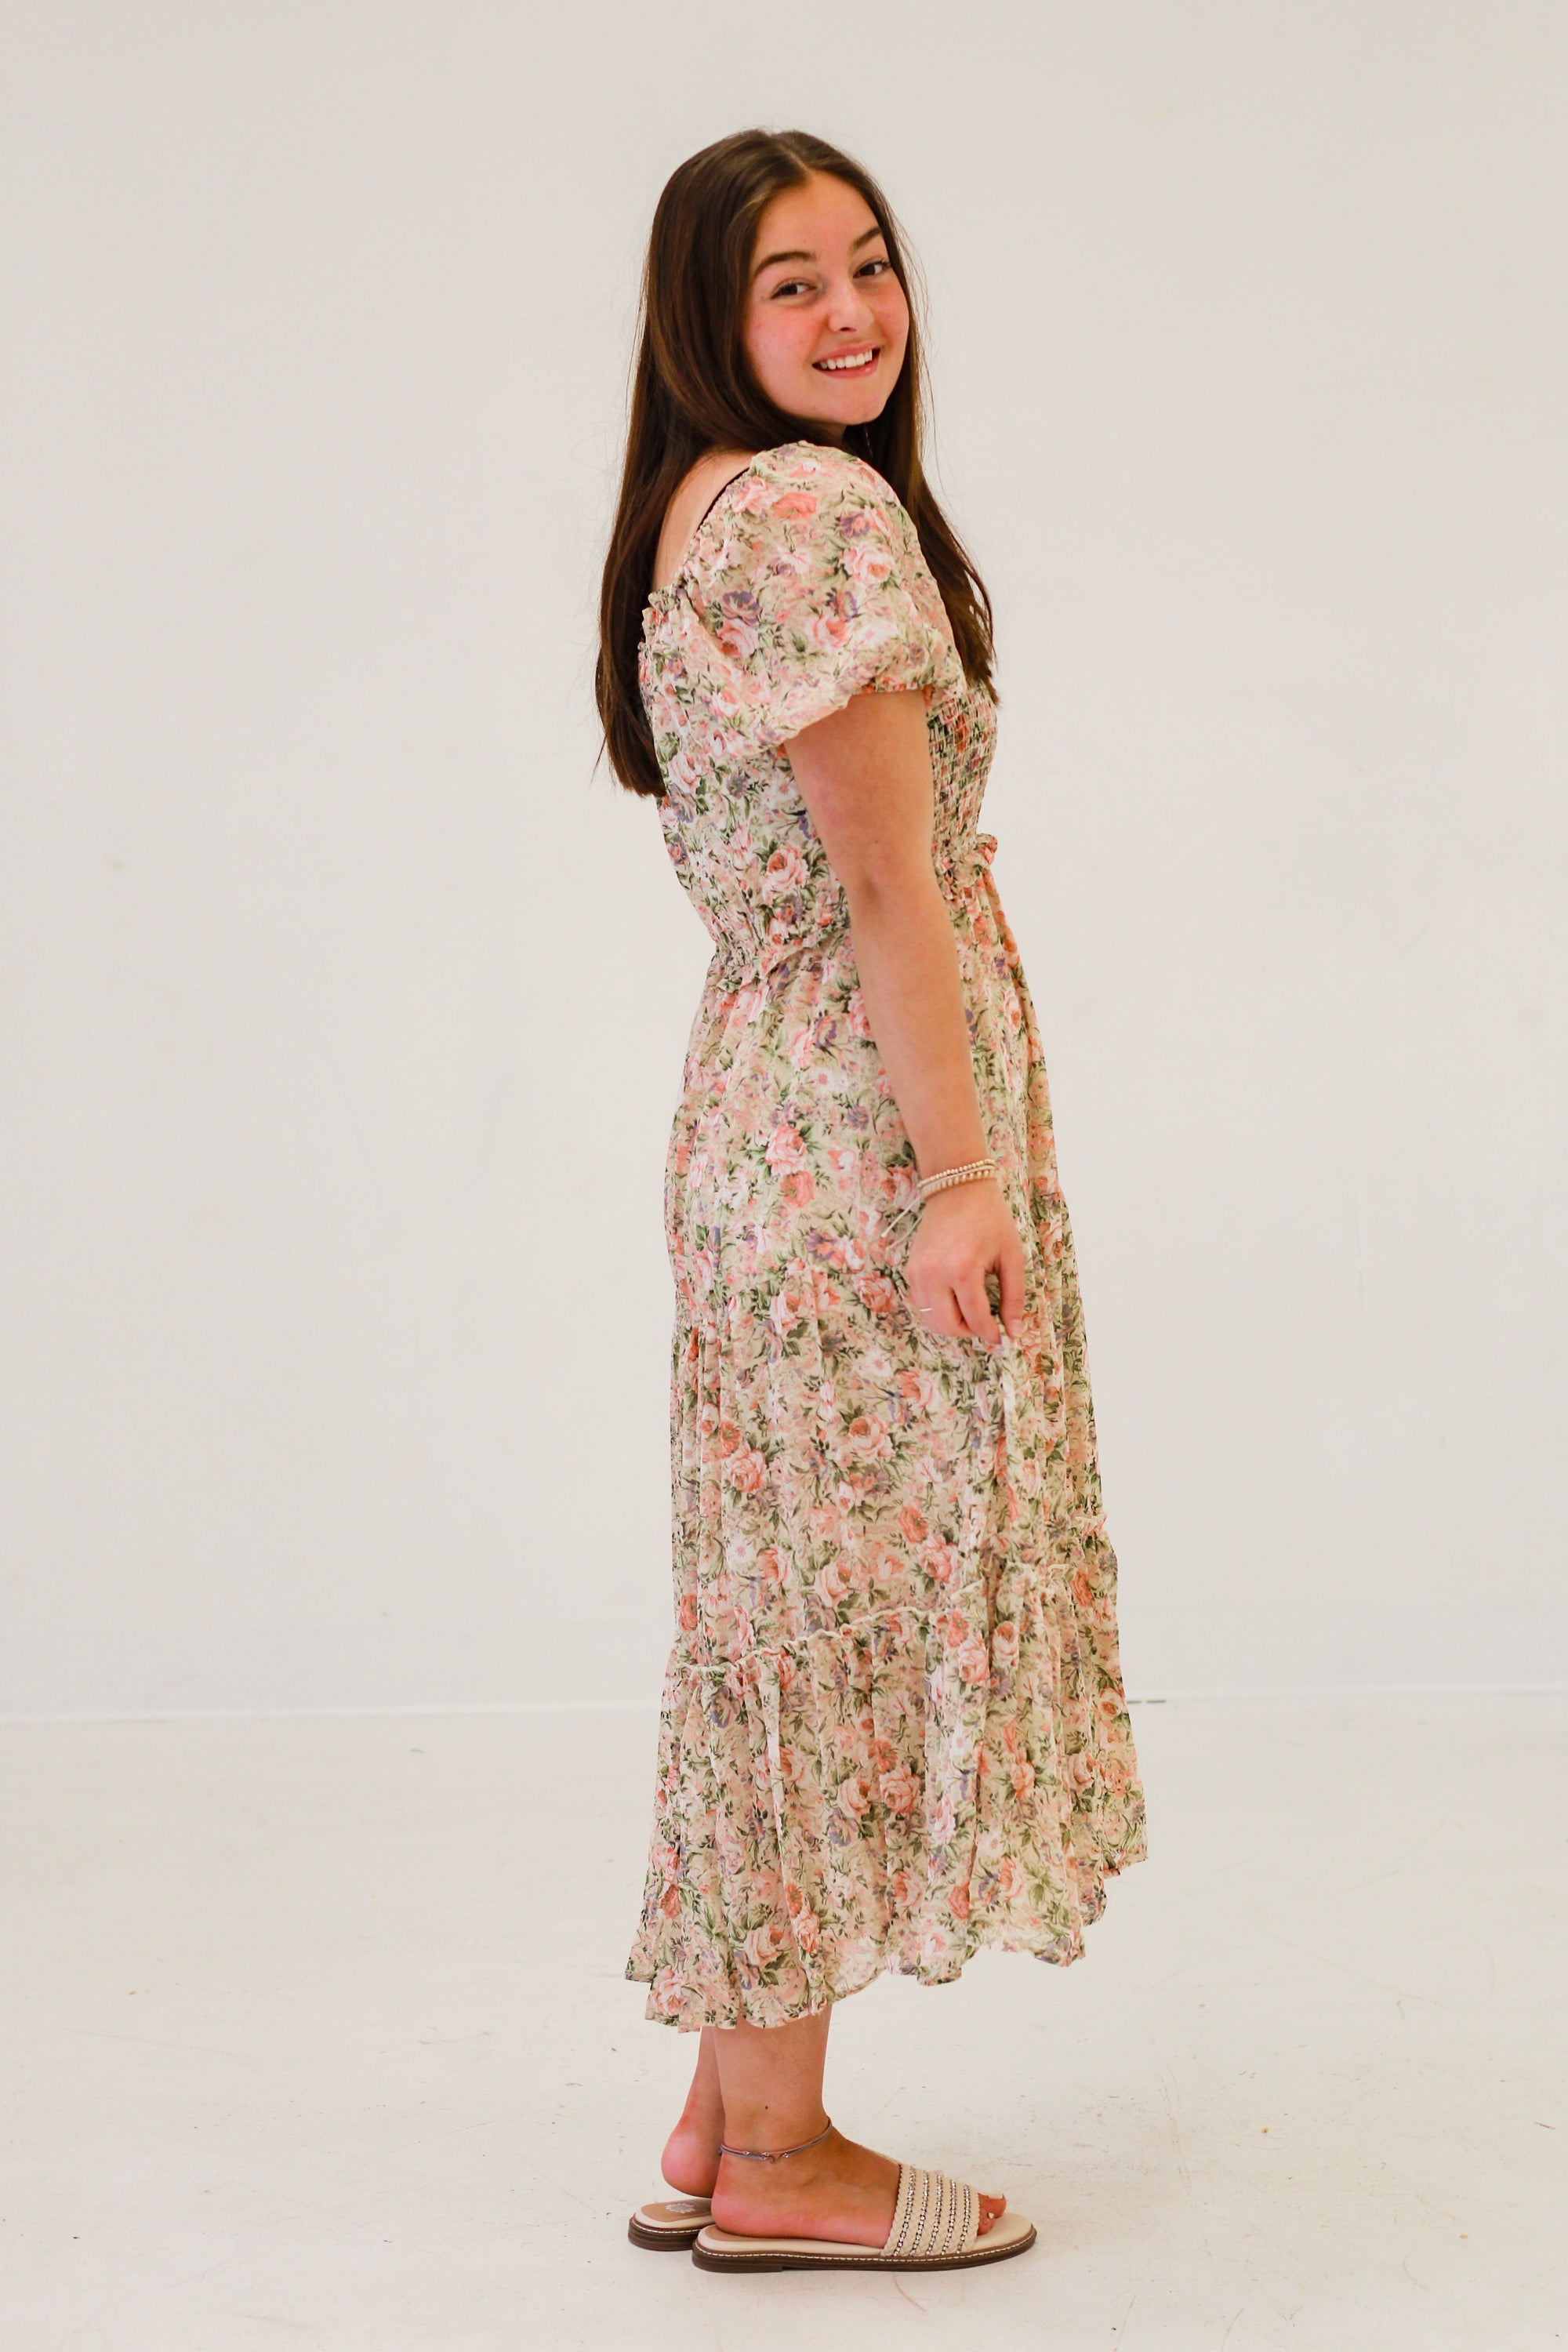 Antique Romantic Floral Dress in Pink